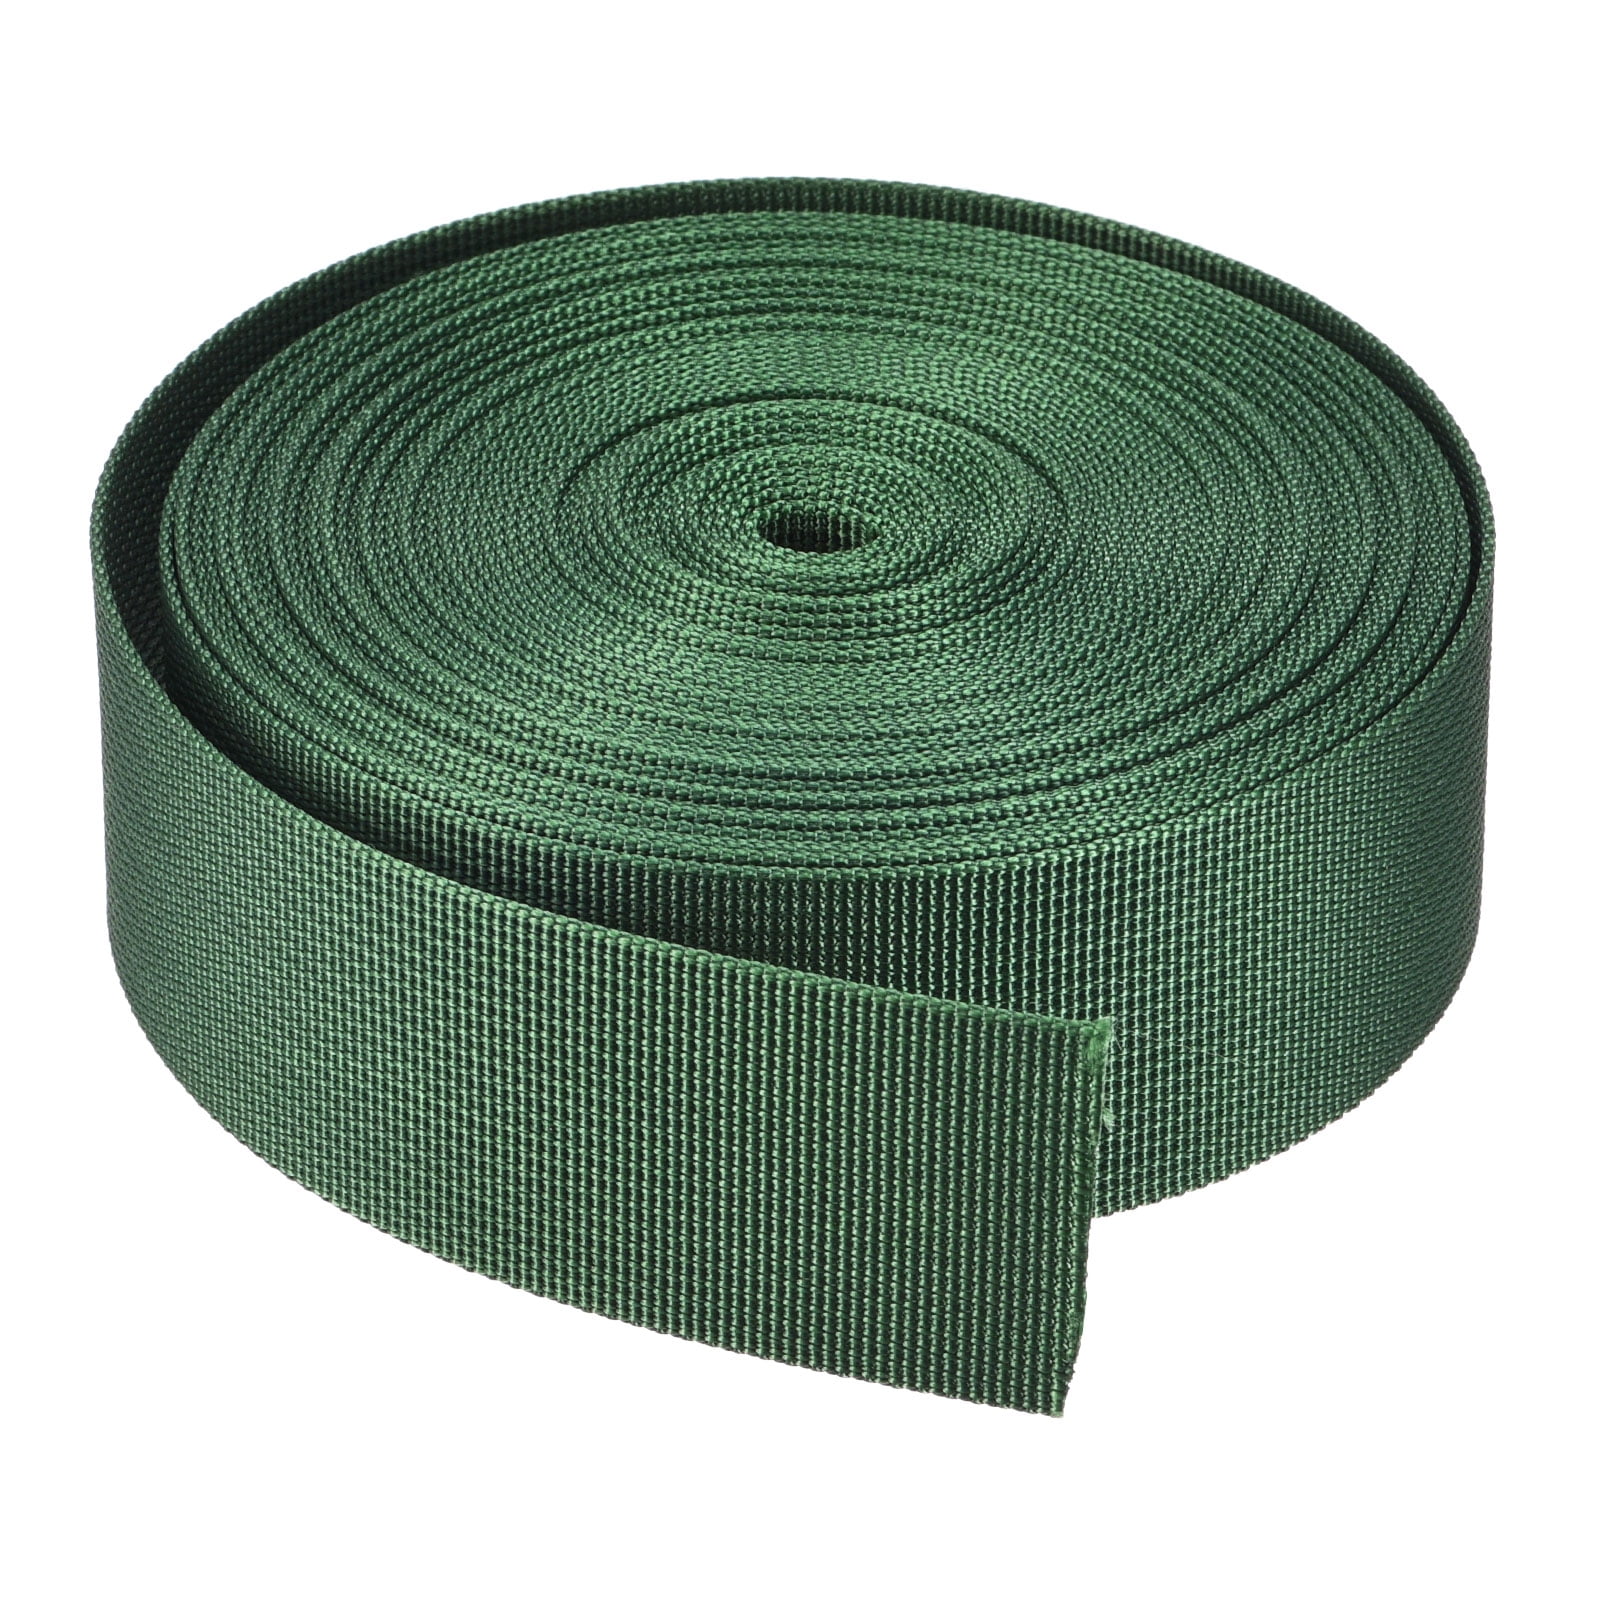 Houseables Nylon Strapping, Webbing Material, 1 Inch W x 10 Yard, Black,  Heavy Climbing Flat Strap, UV Resistant Fabric, Web for Bags, Backpacks